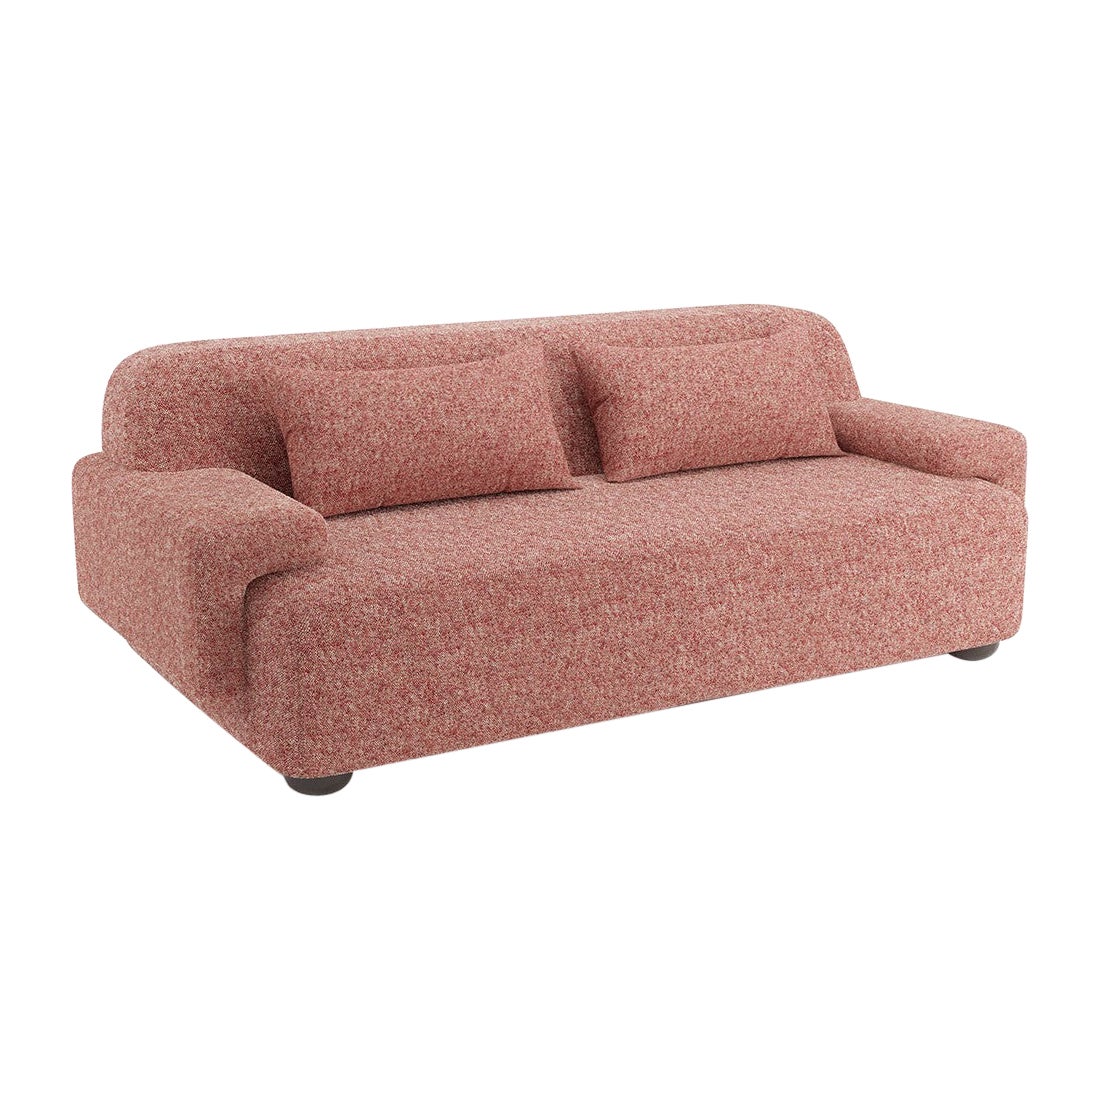 Popus Editions Lena 2.5 Seater Sofa in Sangria London Linen Fabric For Sale